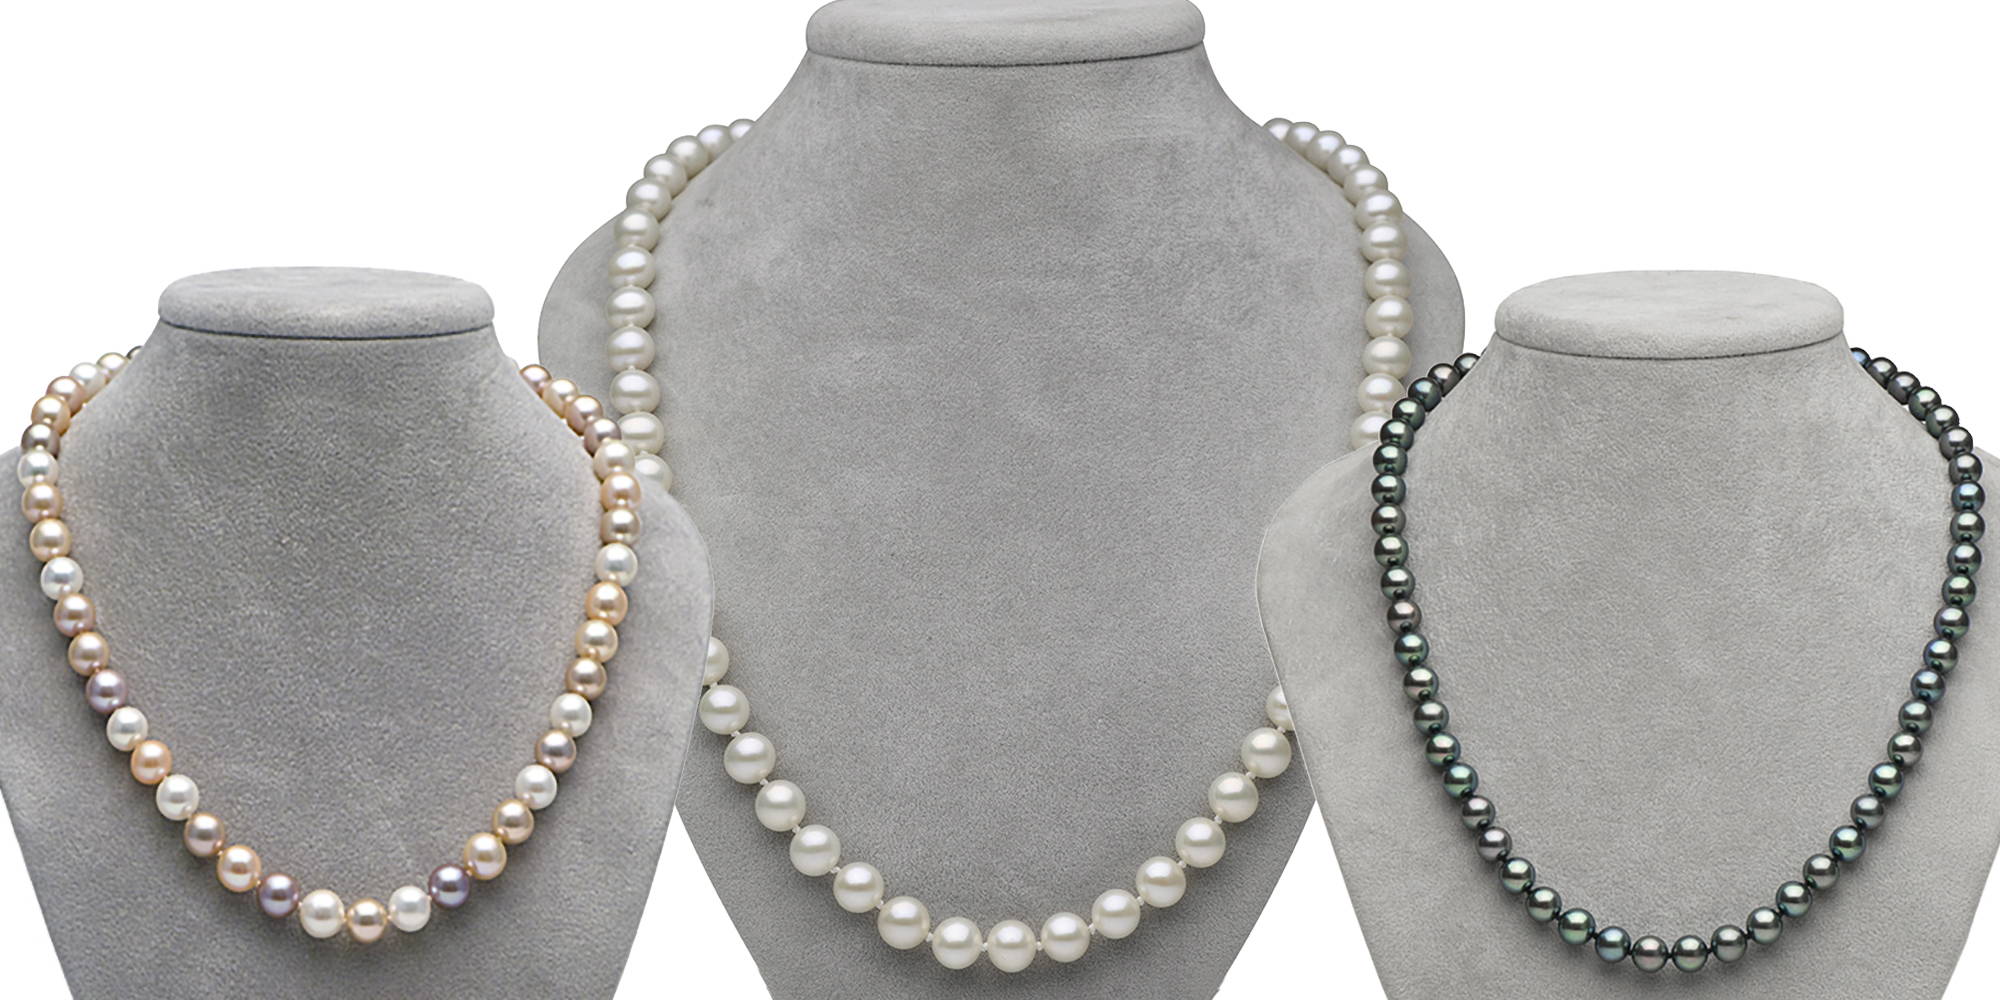 Freshwater Pearl Jewelry Shopping Guide: Pearl Necklaces